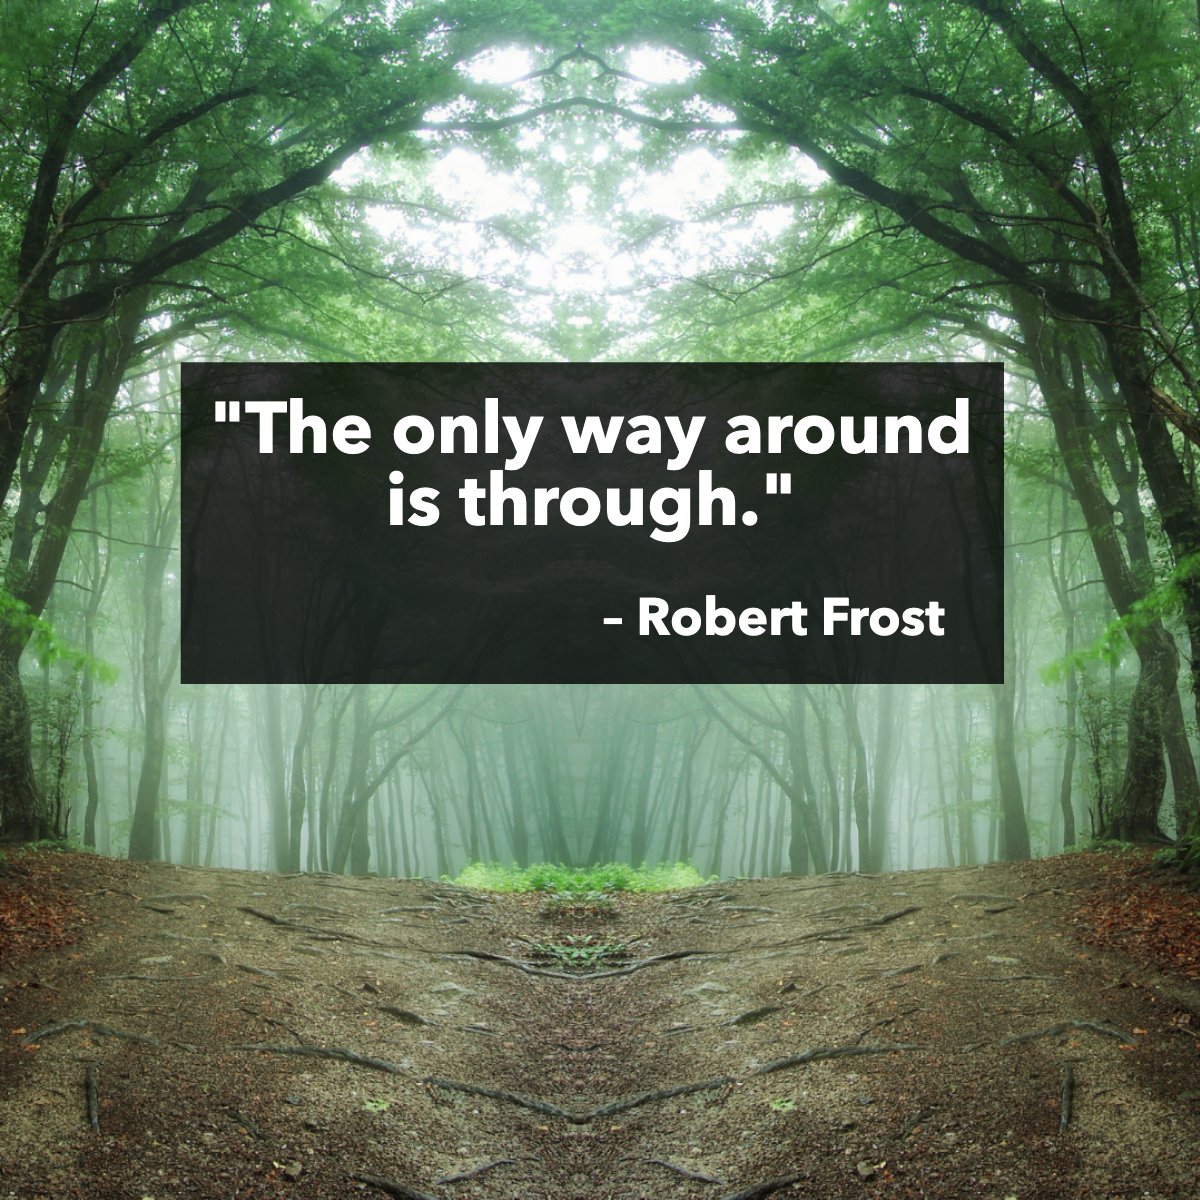 'The only way around is through.' 👌
– Robert Frost

What obstacles are you conquering today? 

#challenges #inspriring #inspirational #woods #forest #robertfrost #quote
 #riscosells #theriscogroup #kwmainline #Uptownliving